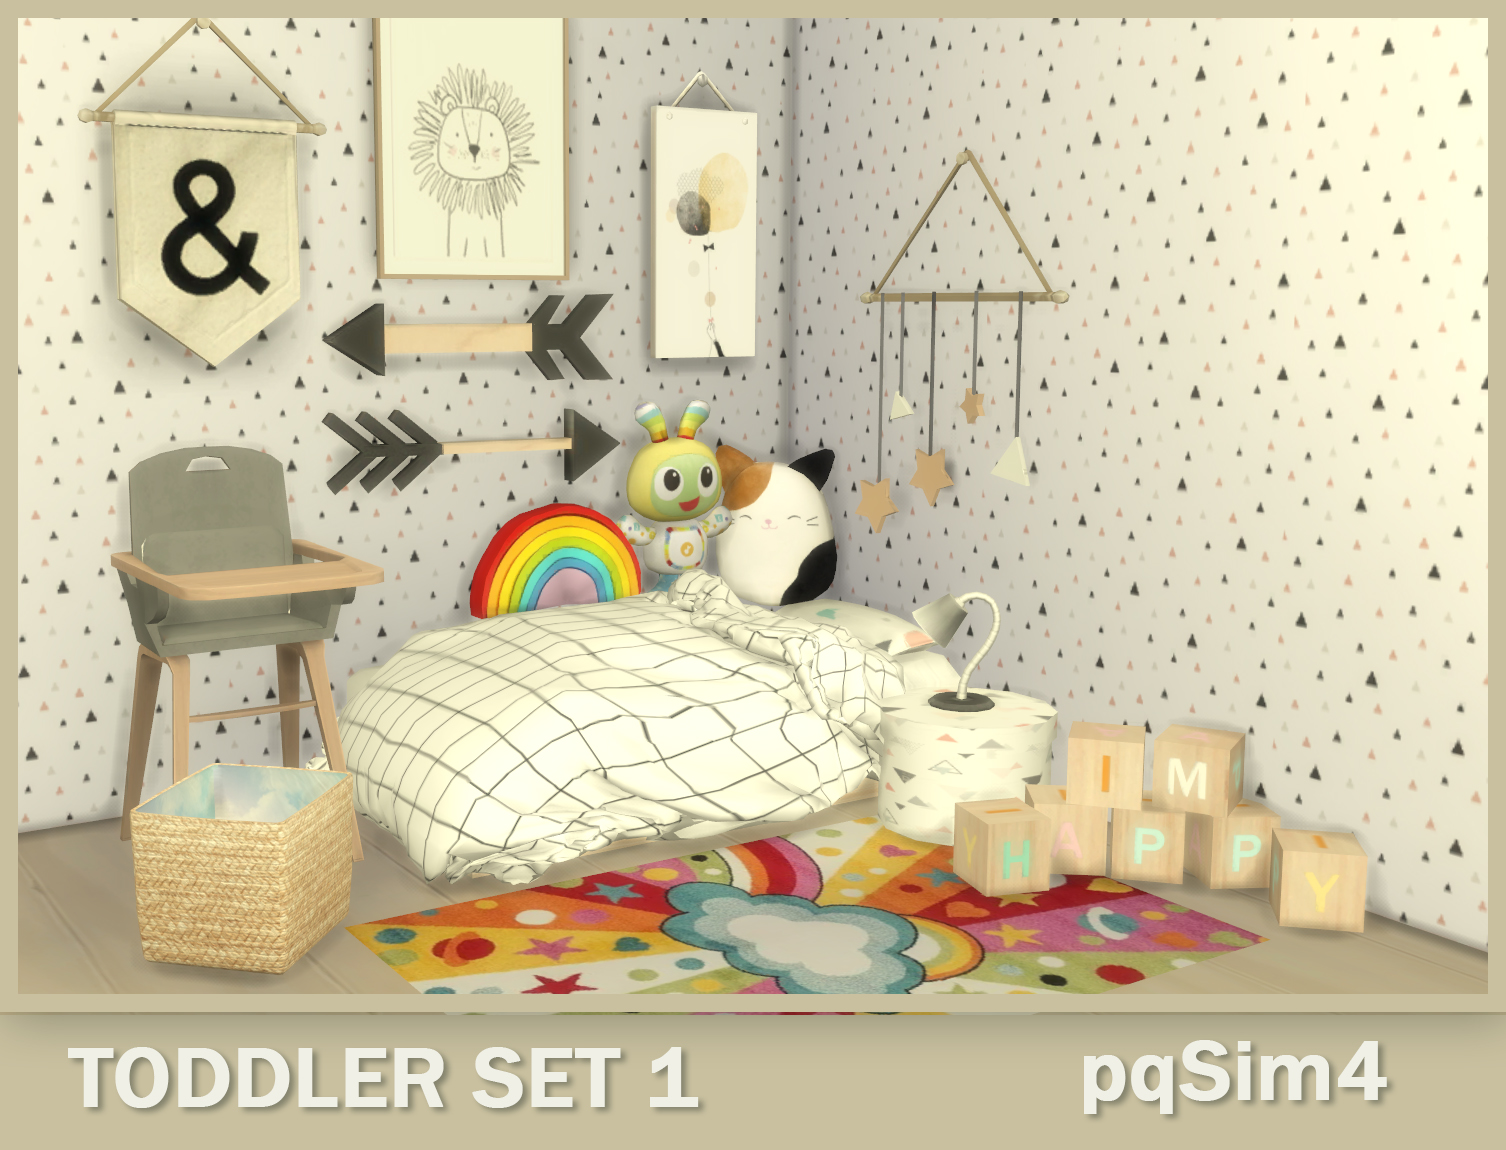 Toddler Set 1 The Sims 4 Custom Content